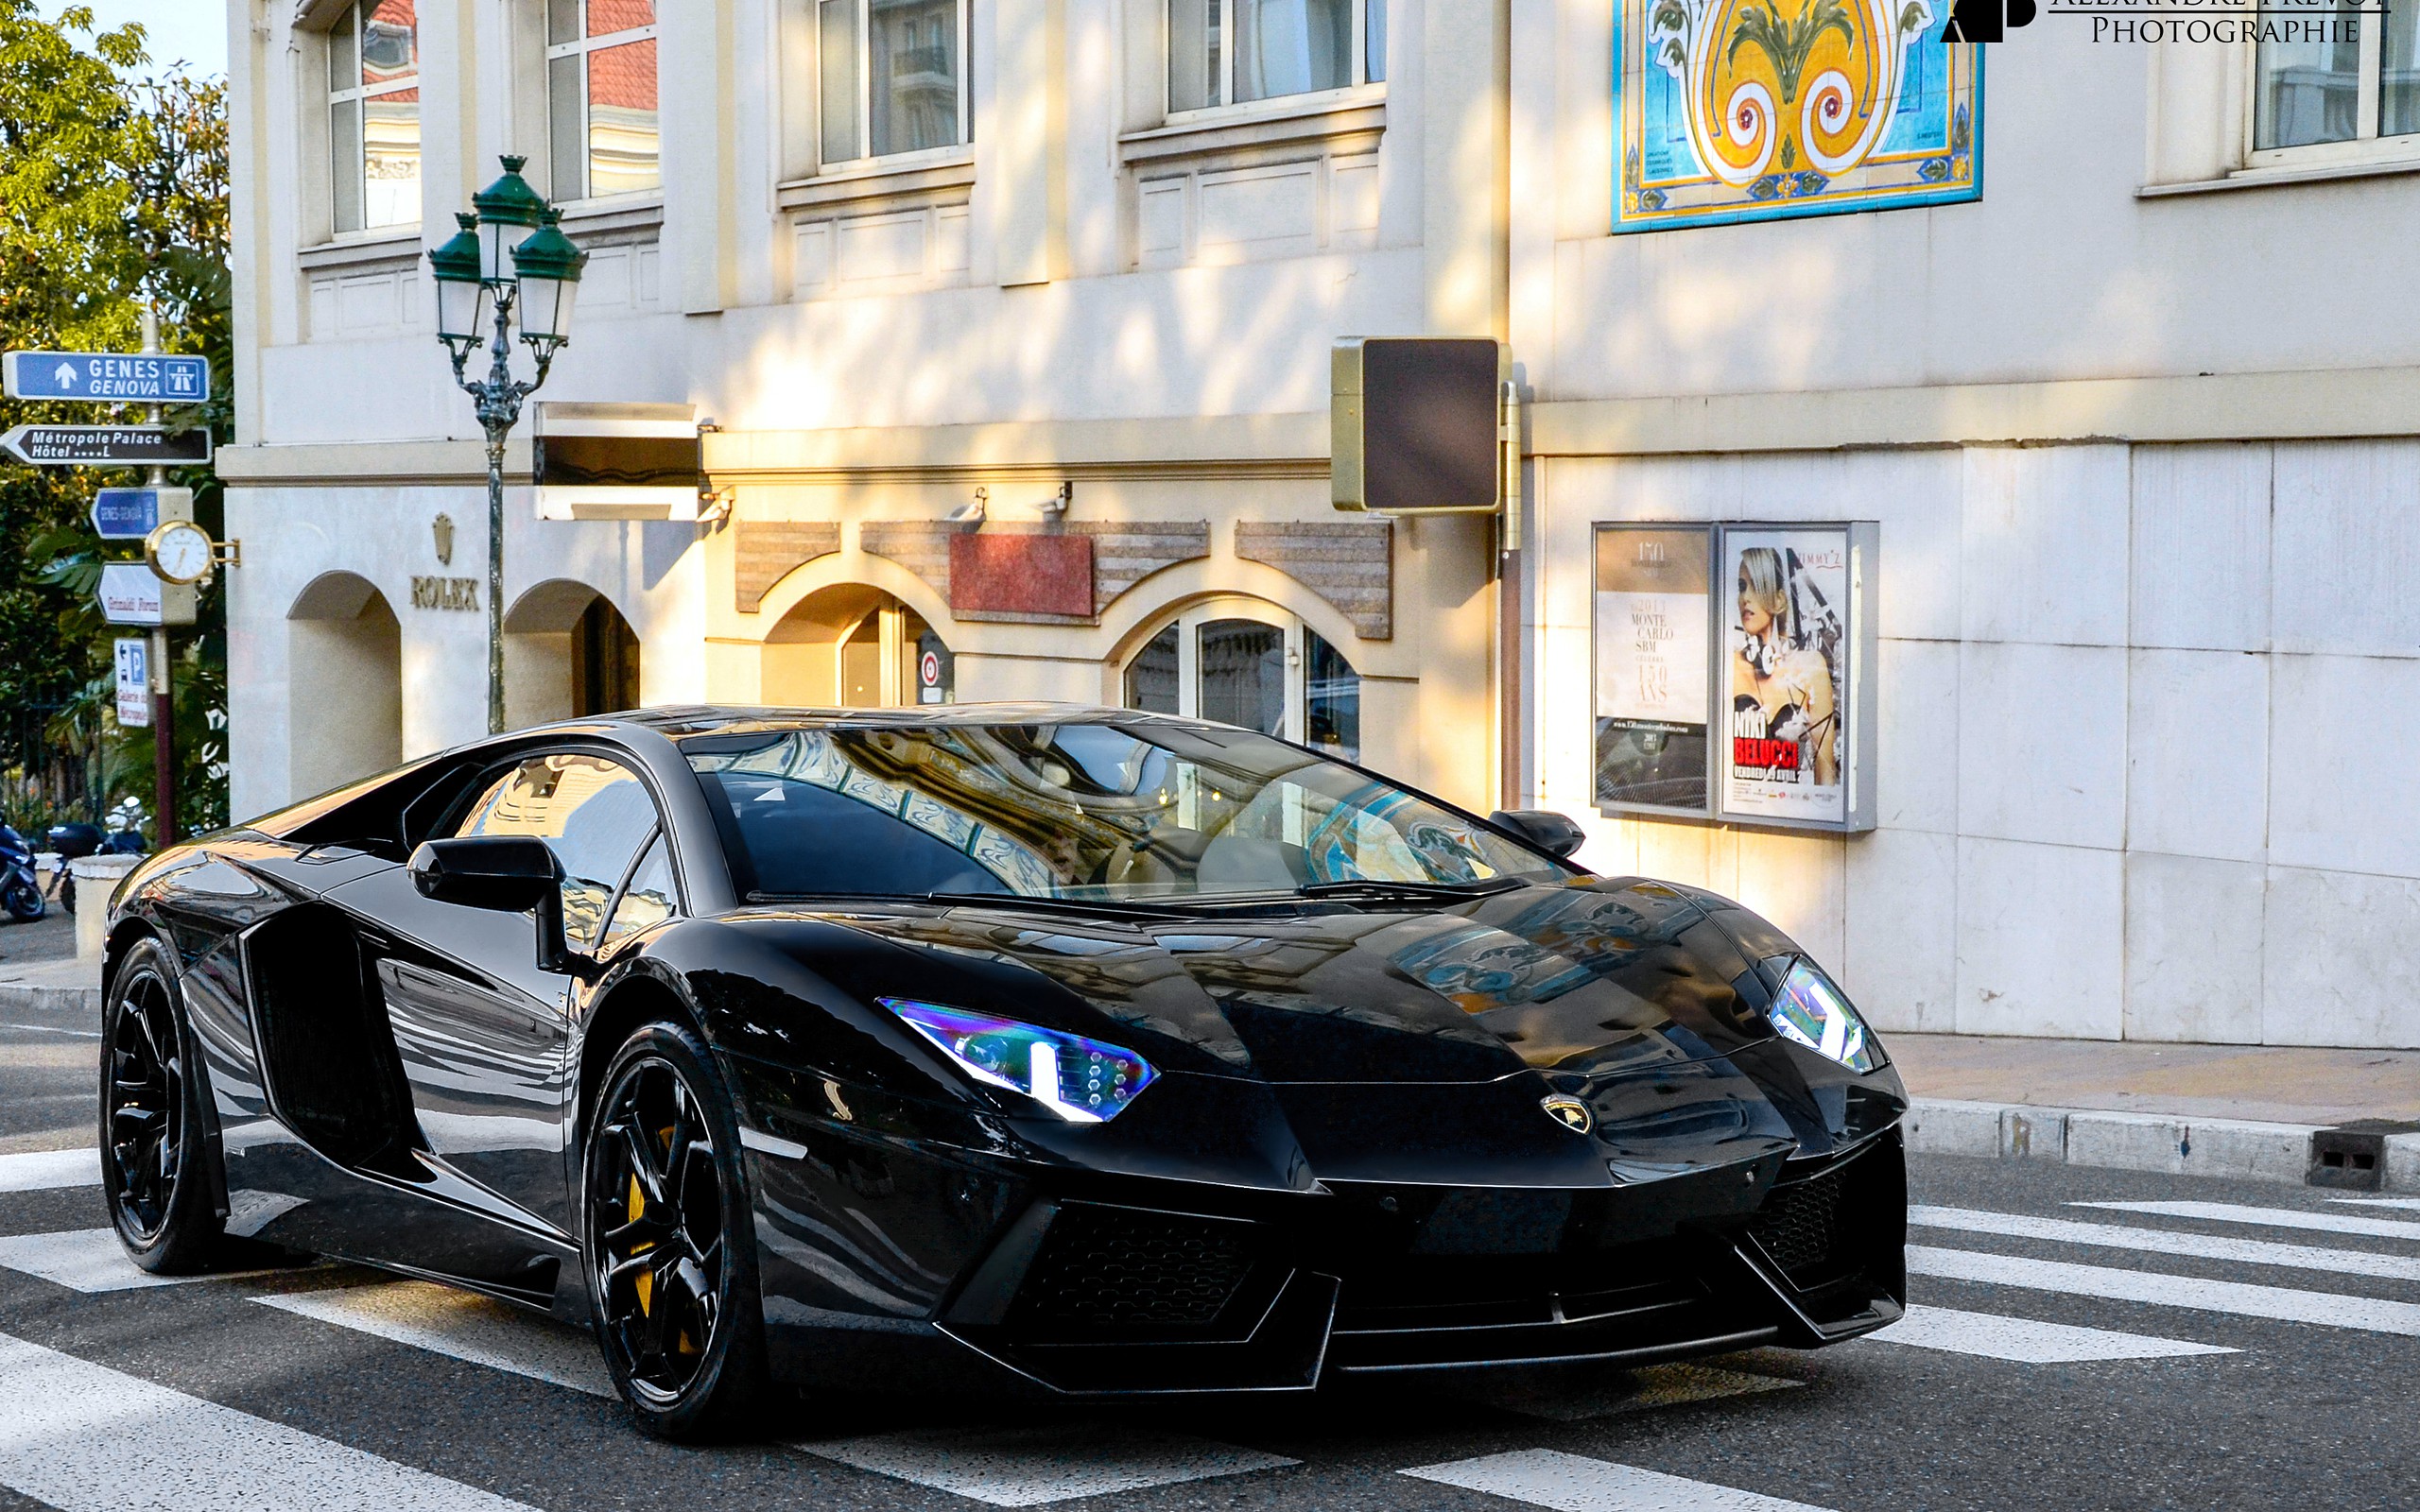 Lamborghini Aventador pictures on HD wallpapers.Only model ...